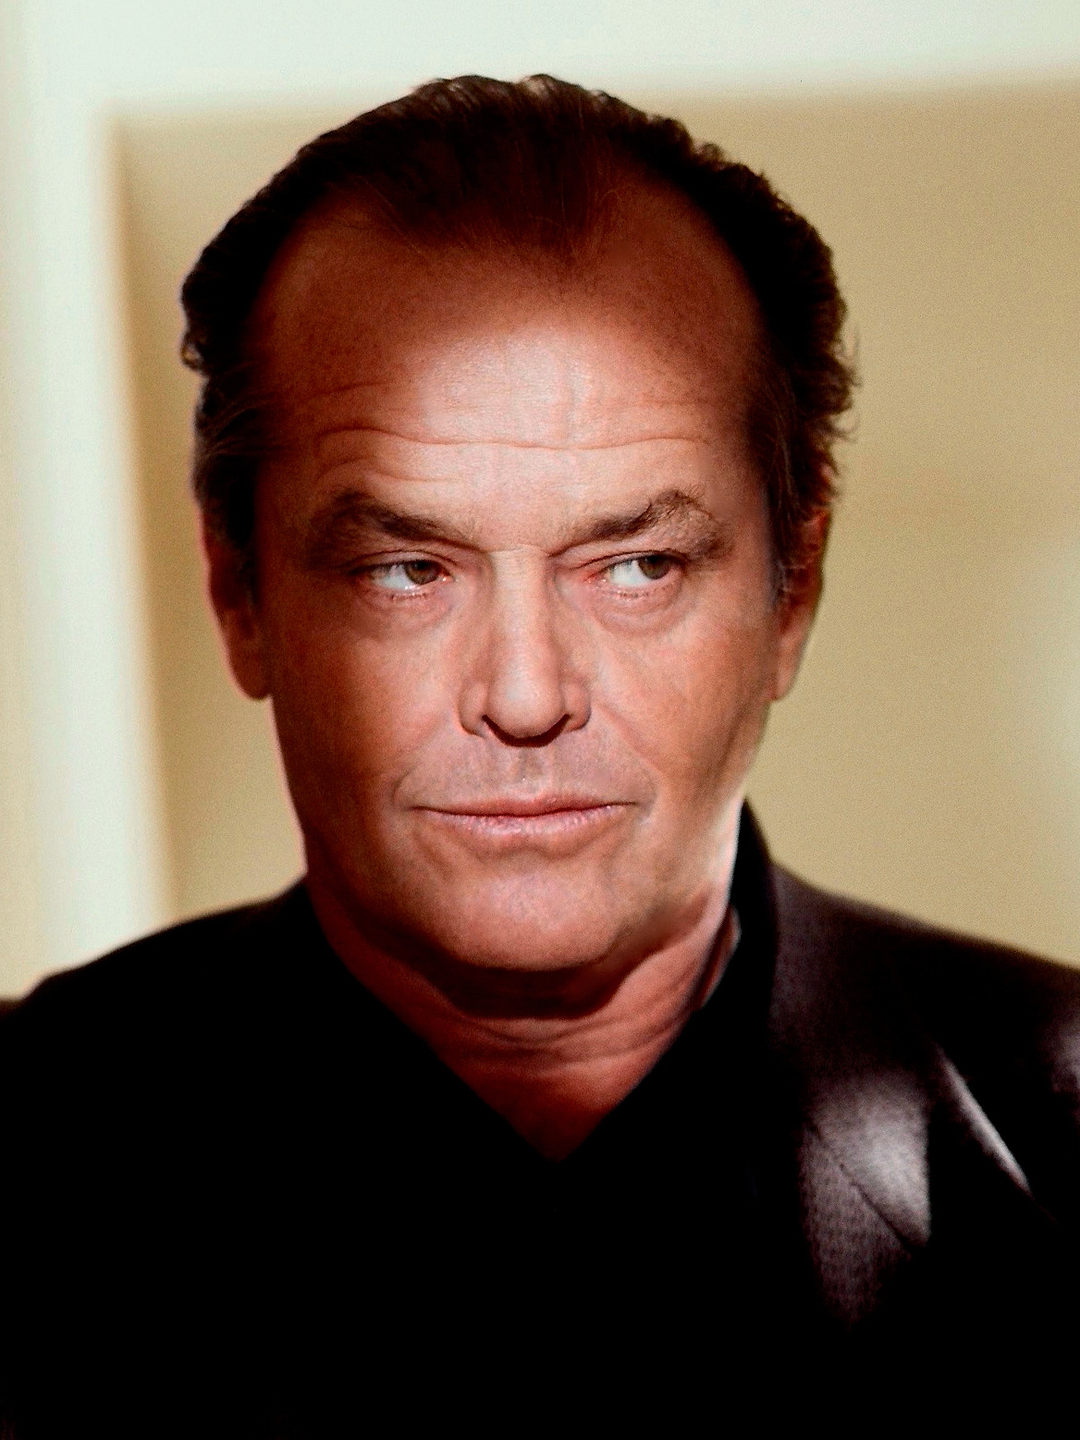 Jack Nicholson does he have a wife